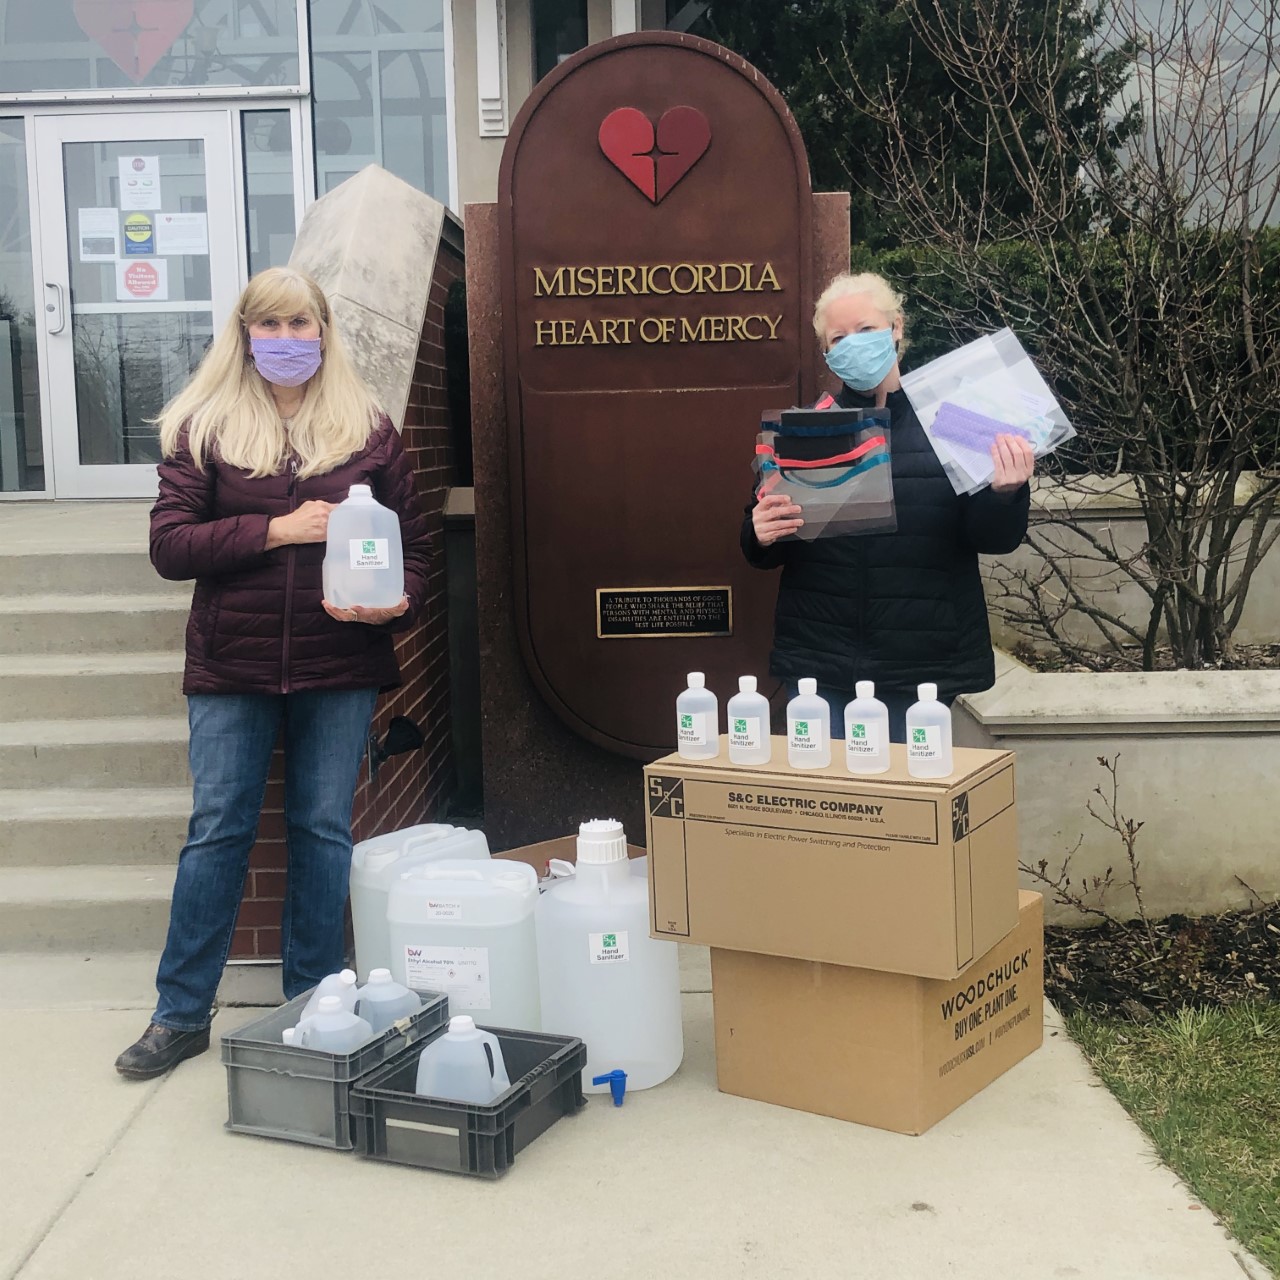 Misericordia Heart of Mercy employees with donated supplies